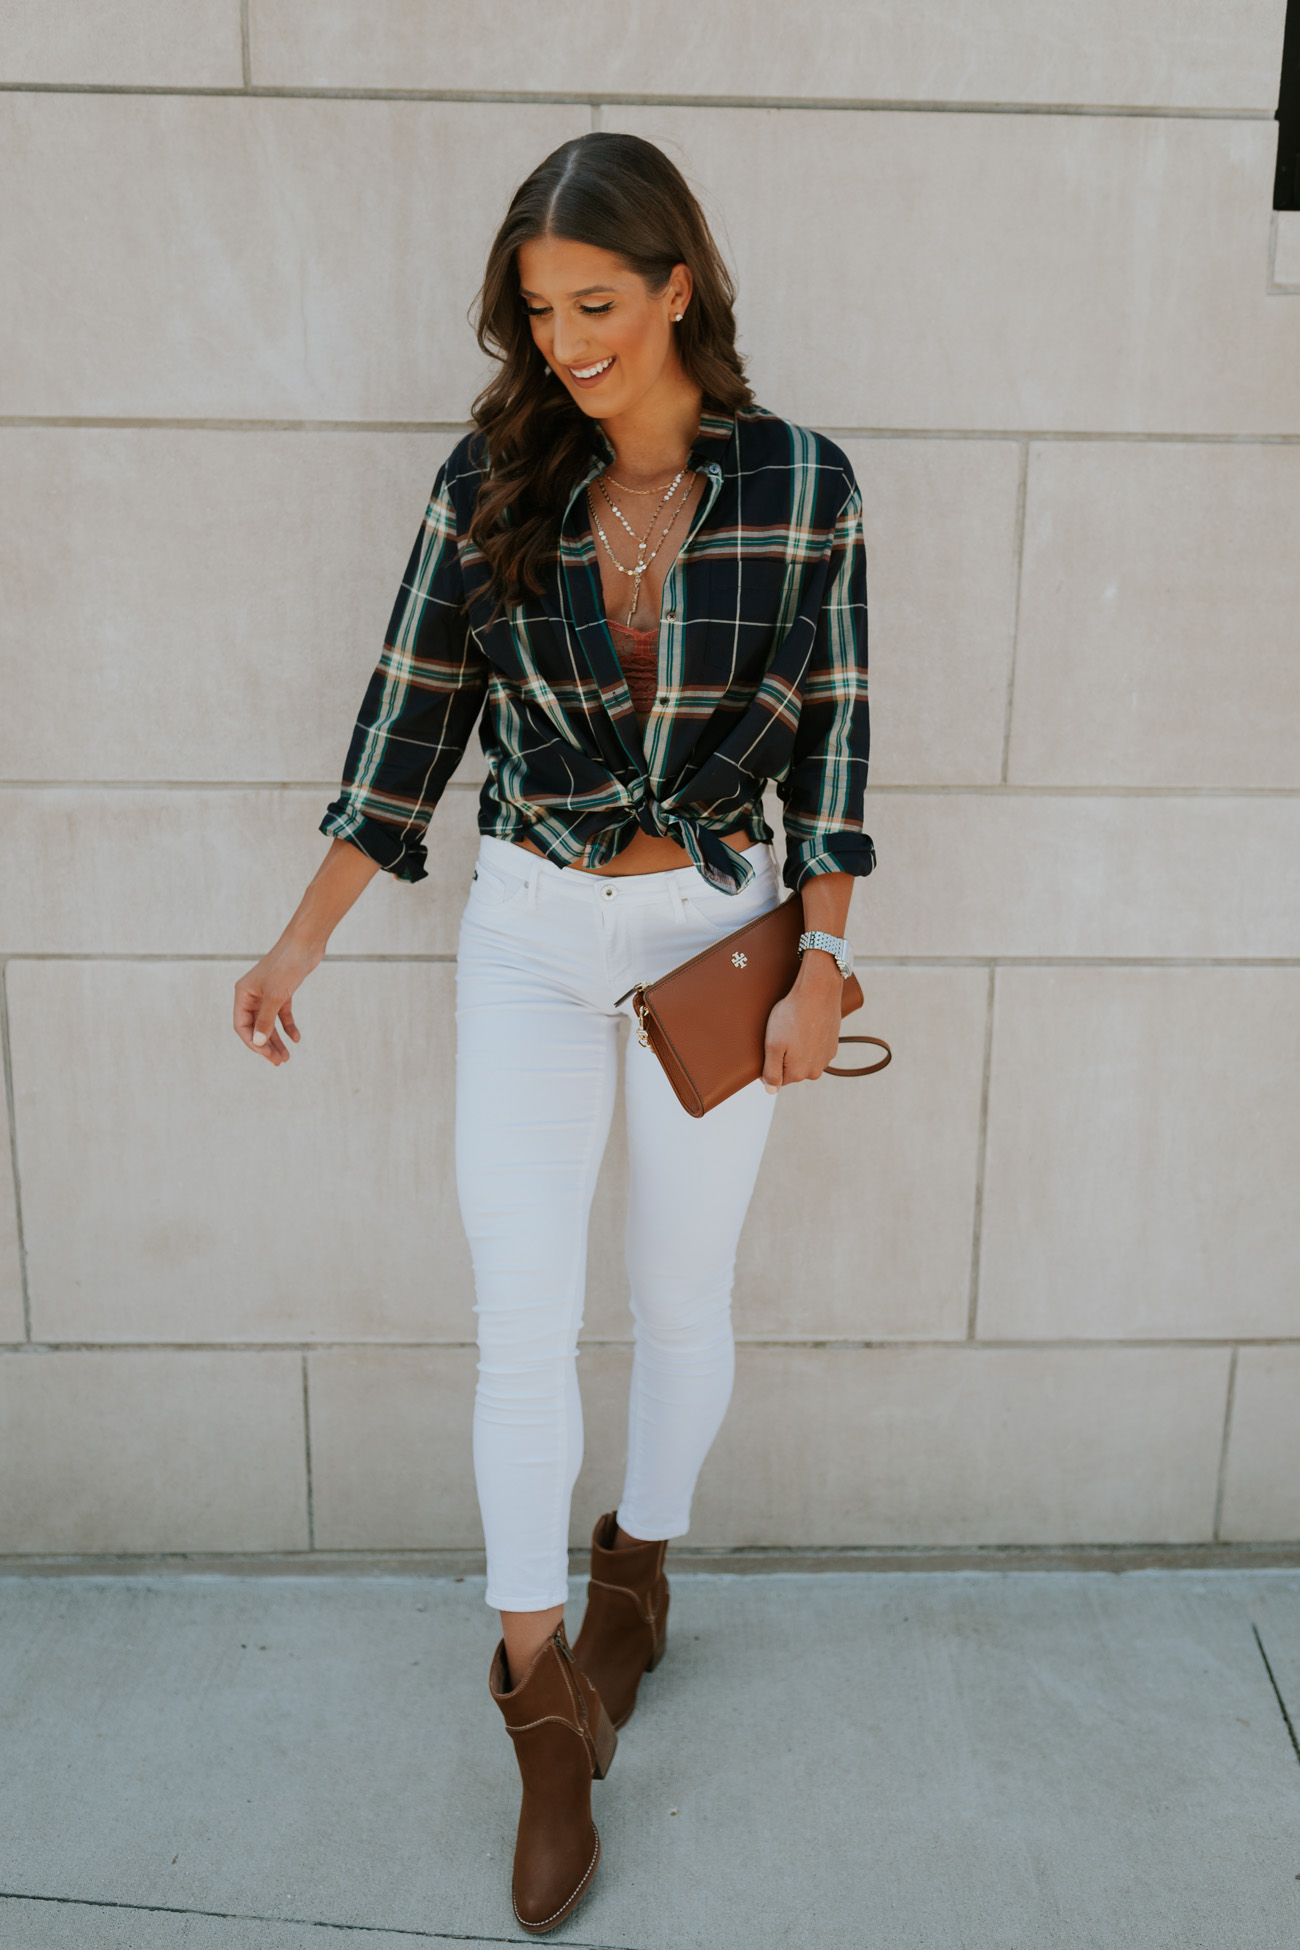 summer plaid shirt, white skinny jean, fall style, fall fashion, ugg booties, summer style, transitional style, tory burch crossbody bag, front tie shirt, tie plaid shirt, layered necklace, delicate necklace // grace wainwright, grace white a southern drawl